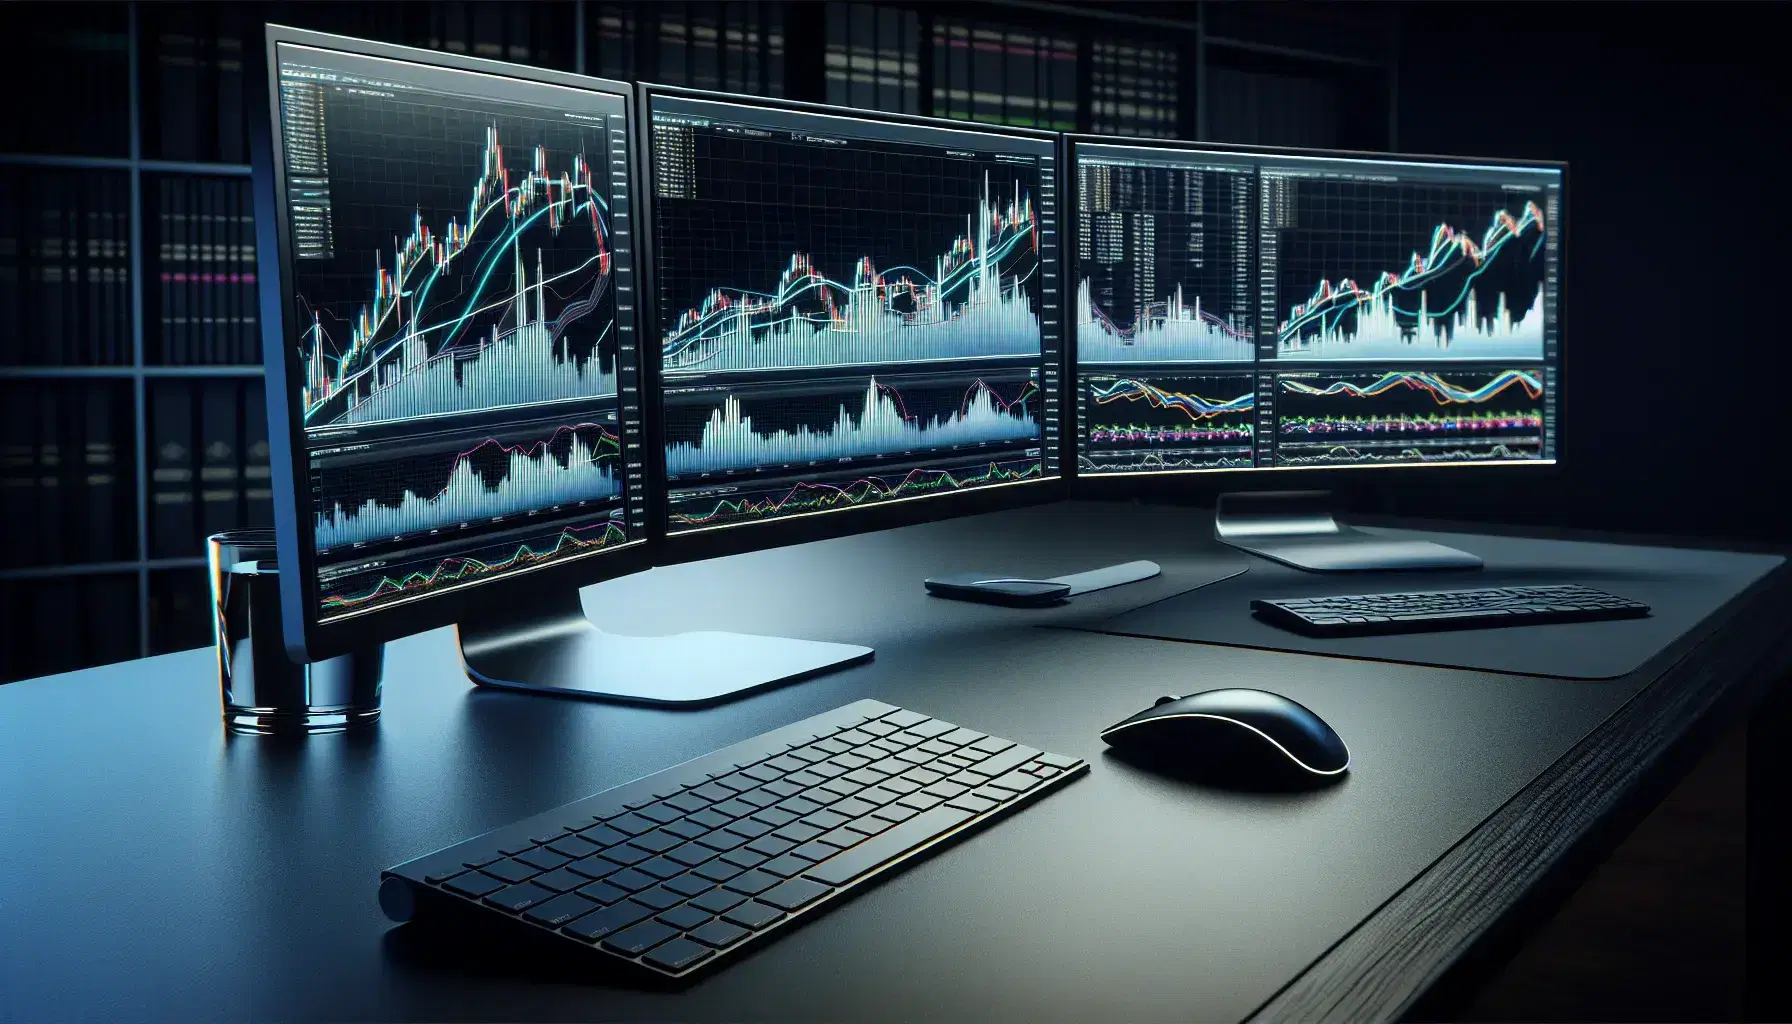 Financial trader's desk with a keyboard, mouse, and four monitors displaying colorful graphs, surrounded by blurred figures of colleagues in a stock exchange.